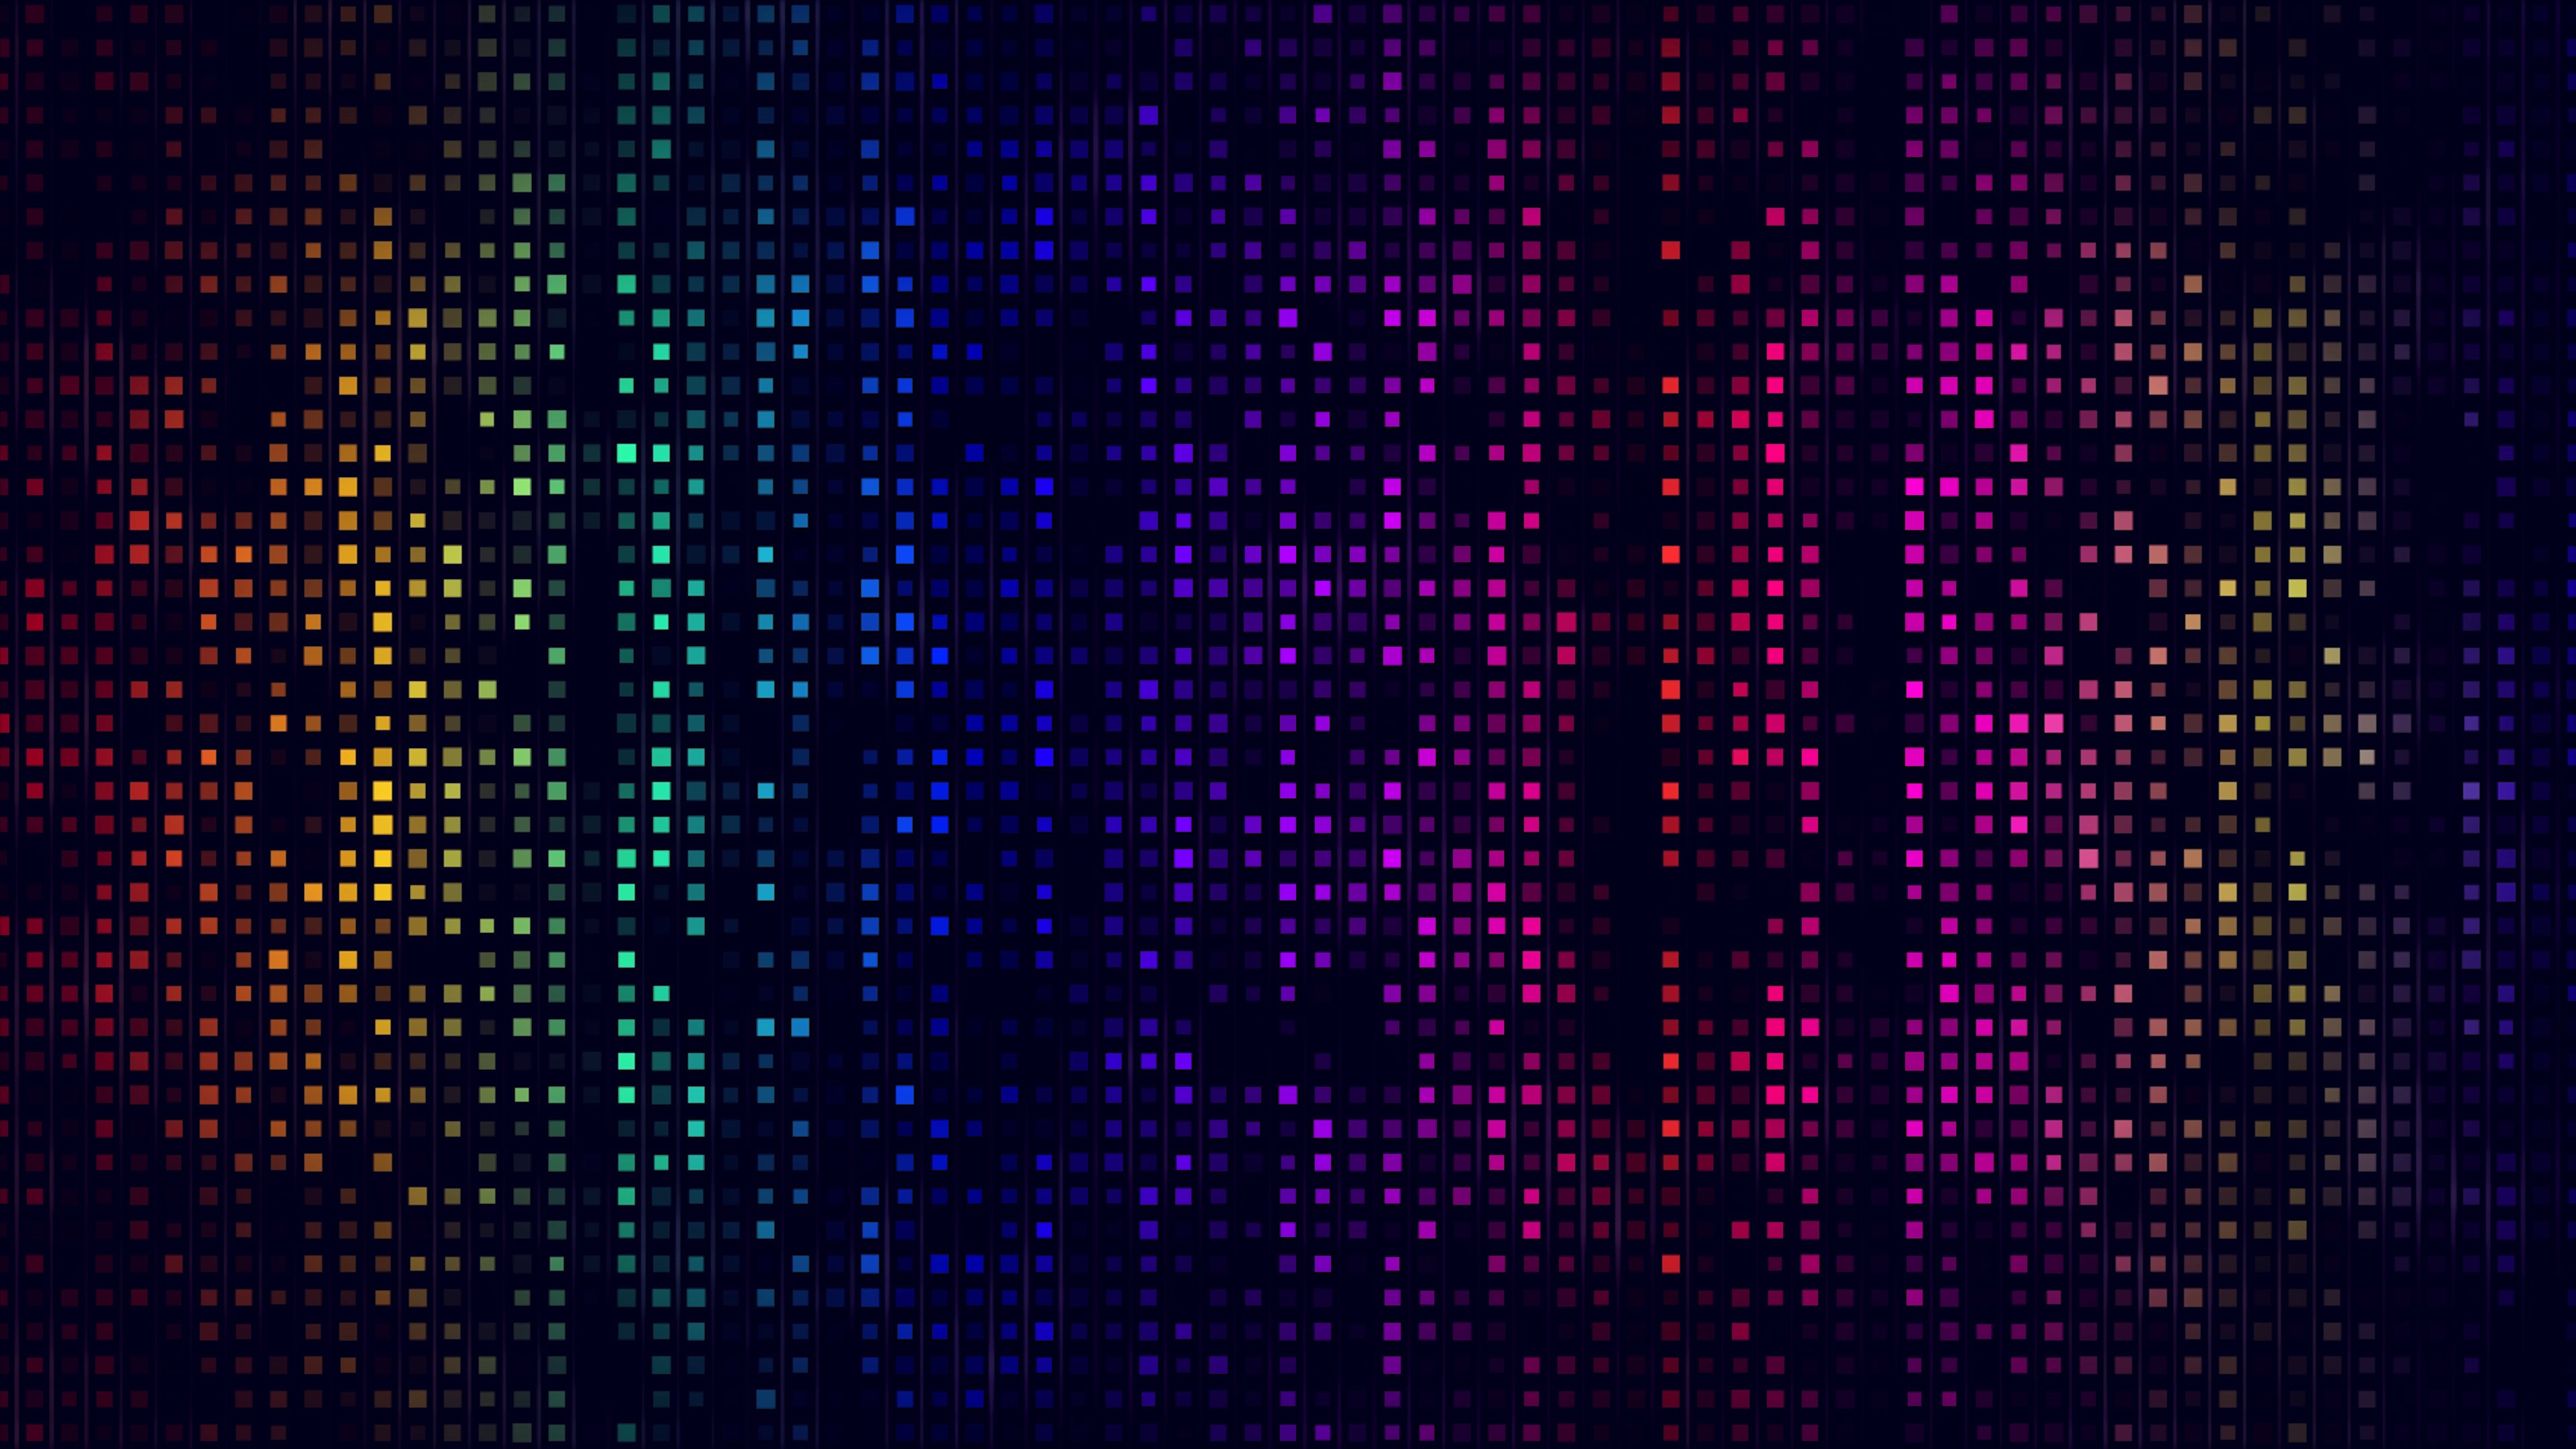 Backdrop: Mosaic, Multicolor, Pattern, Texture, Dark, Abstract, Rainbow, Quadrilaterals. 3840x2160 4K Background.